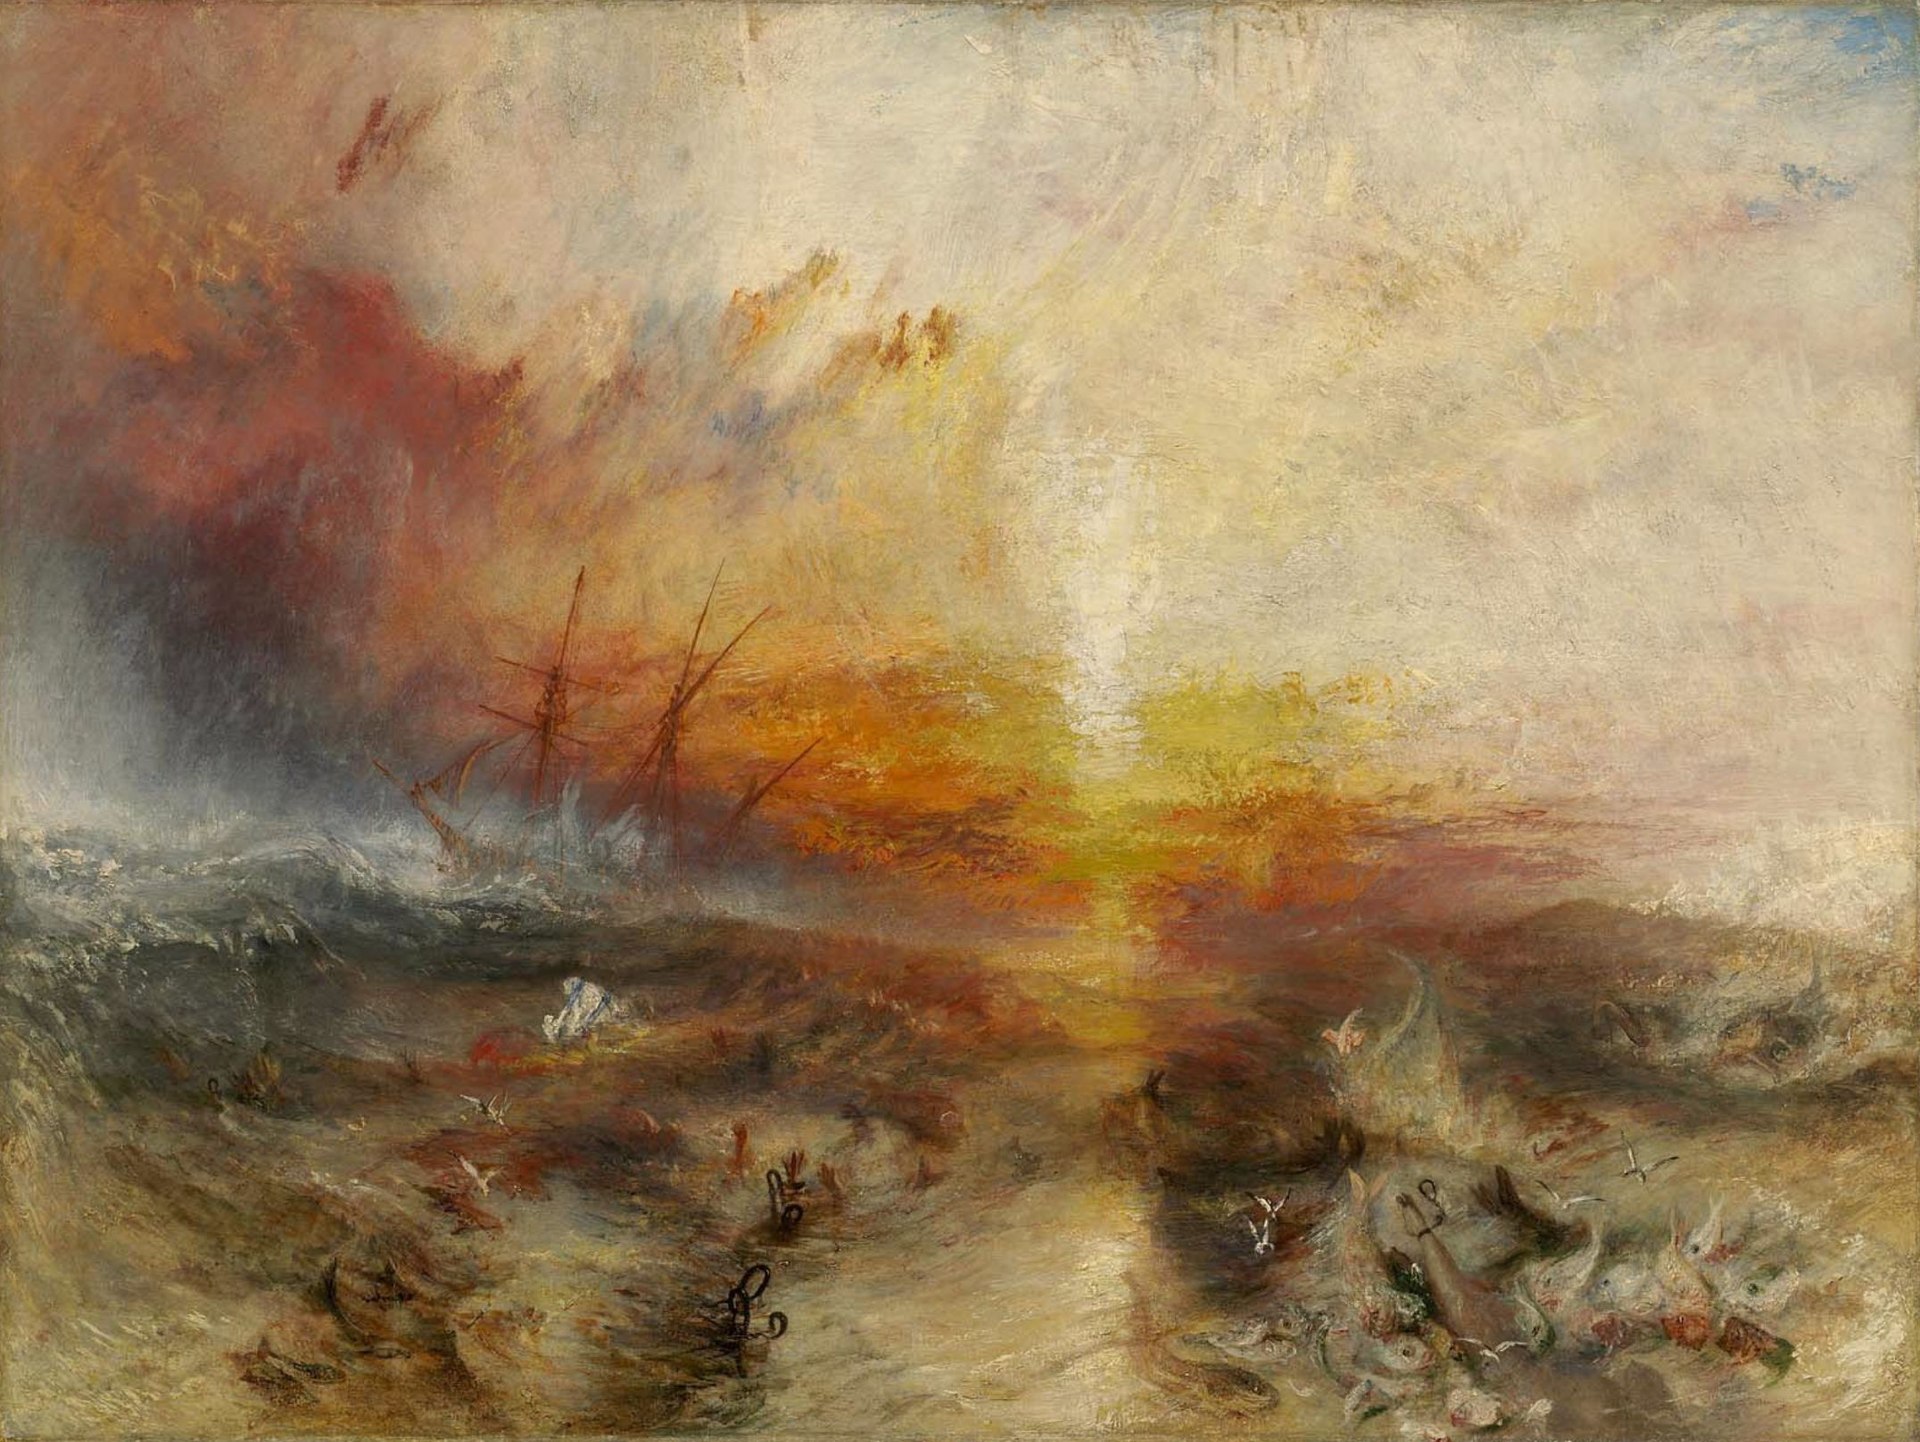 Turner 1840 Slavers throwing overboard the Dead and Dying — Typhoon coming on (The Slave Ship) Boston Mueum of Fine Arts